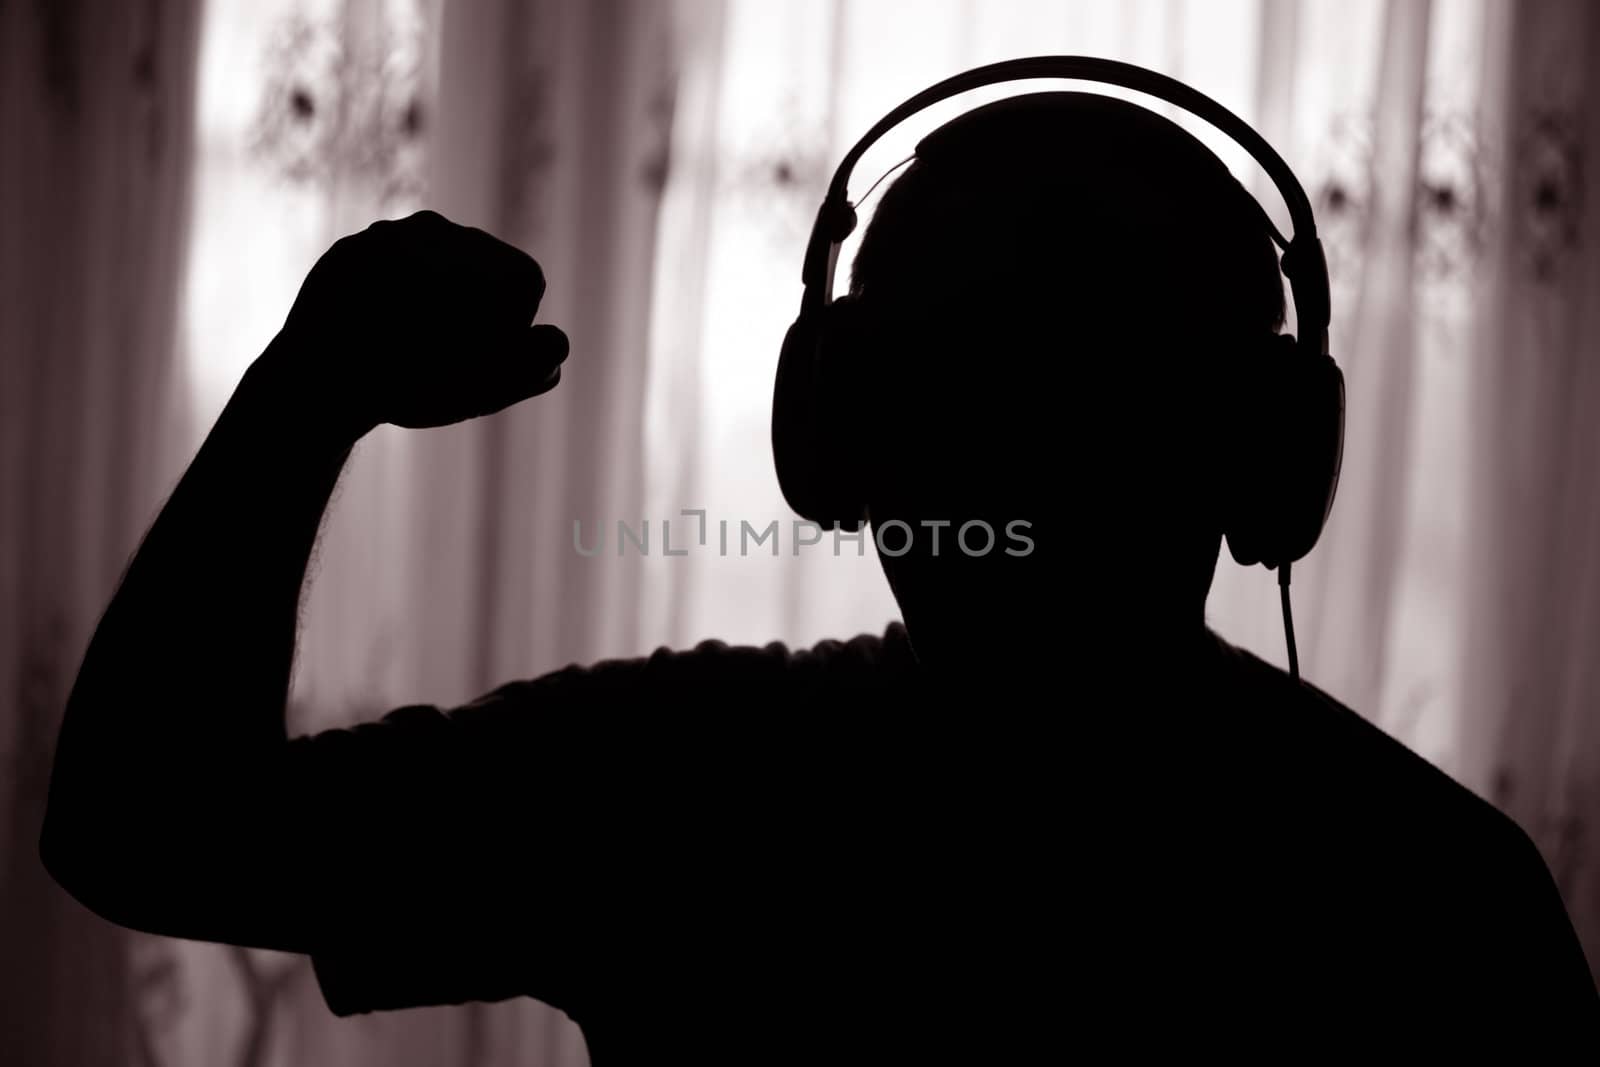 The man listens to music in a dark room